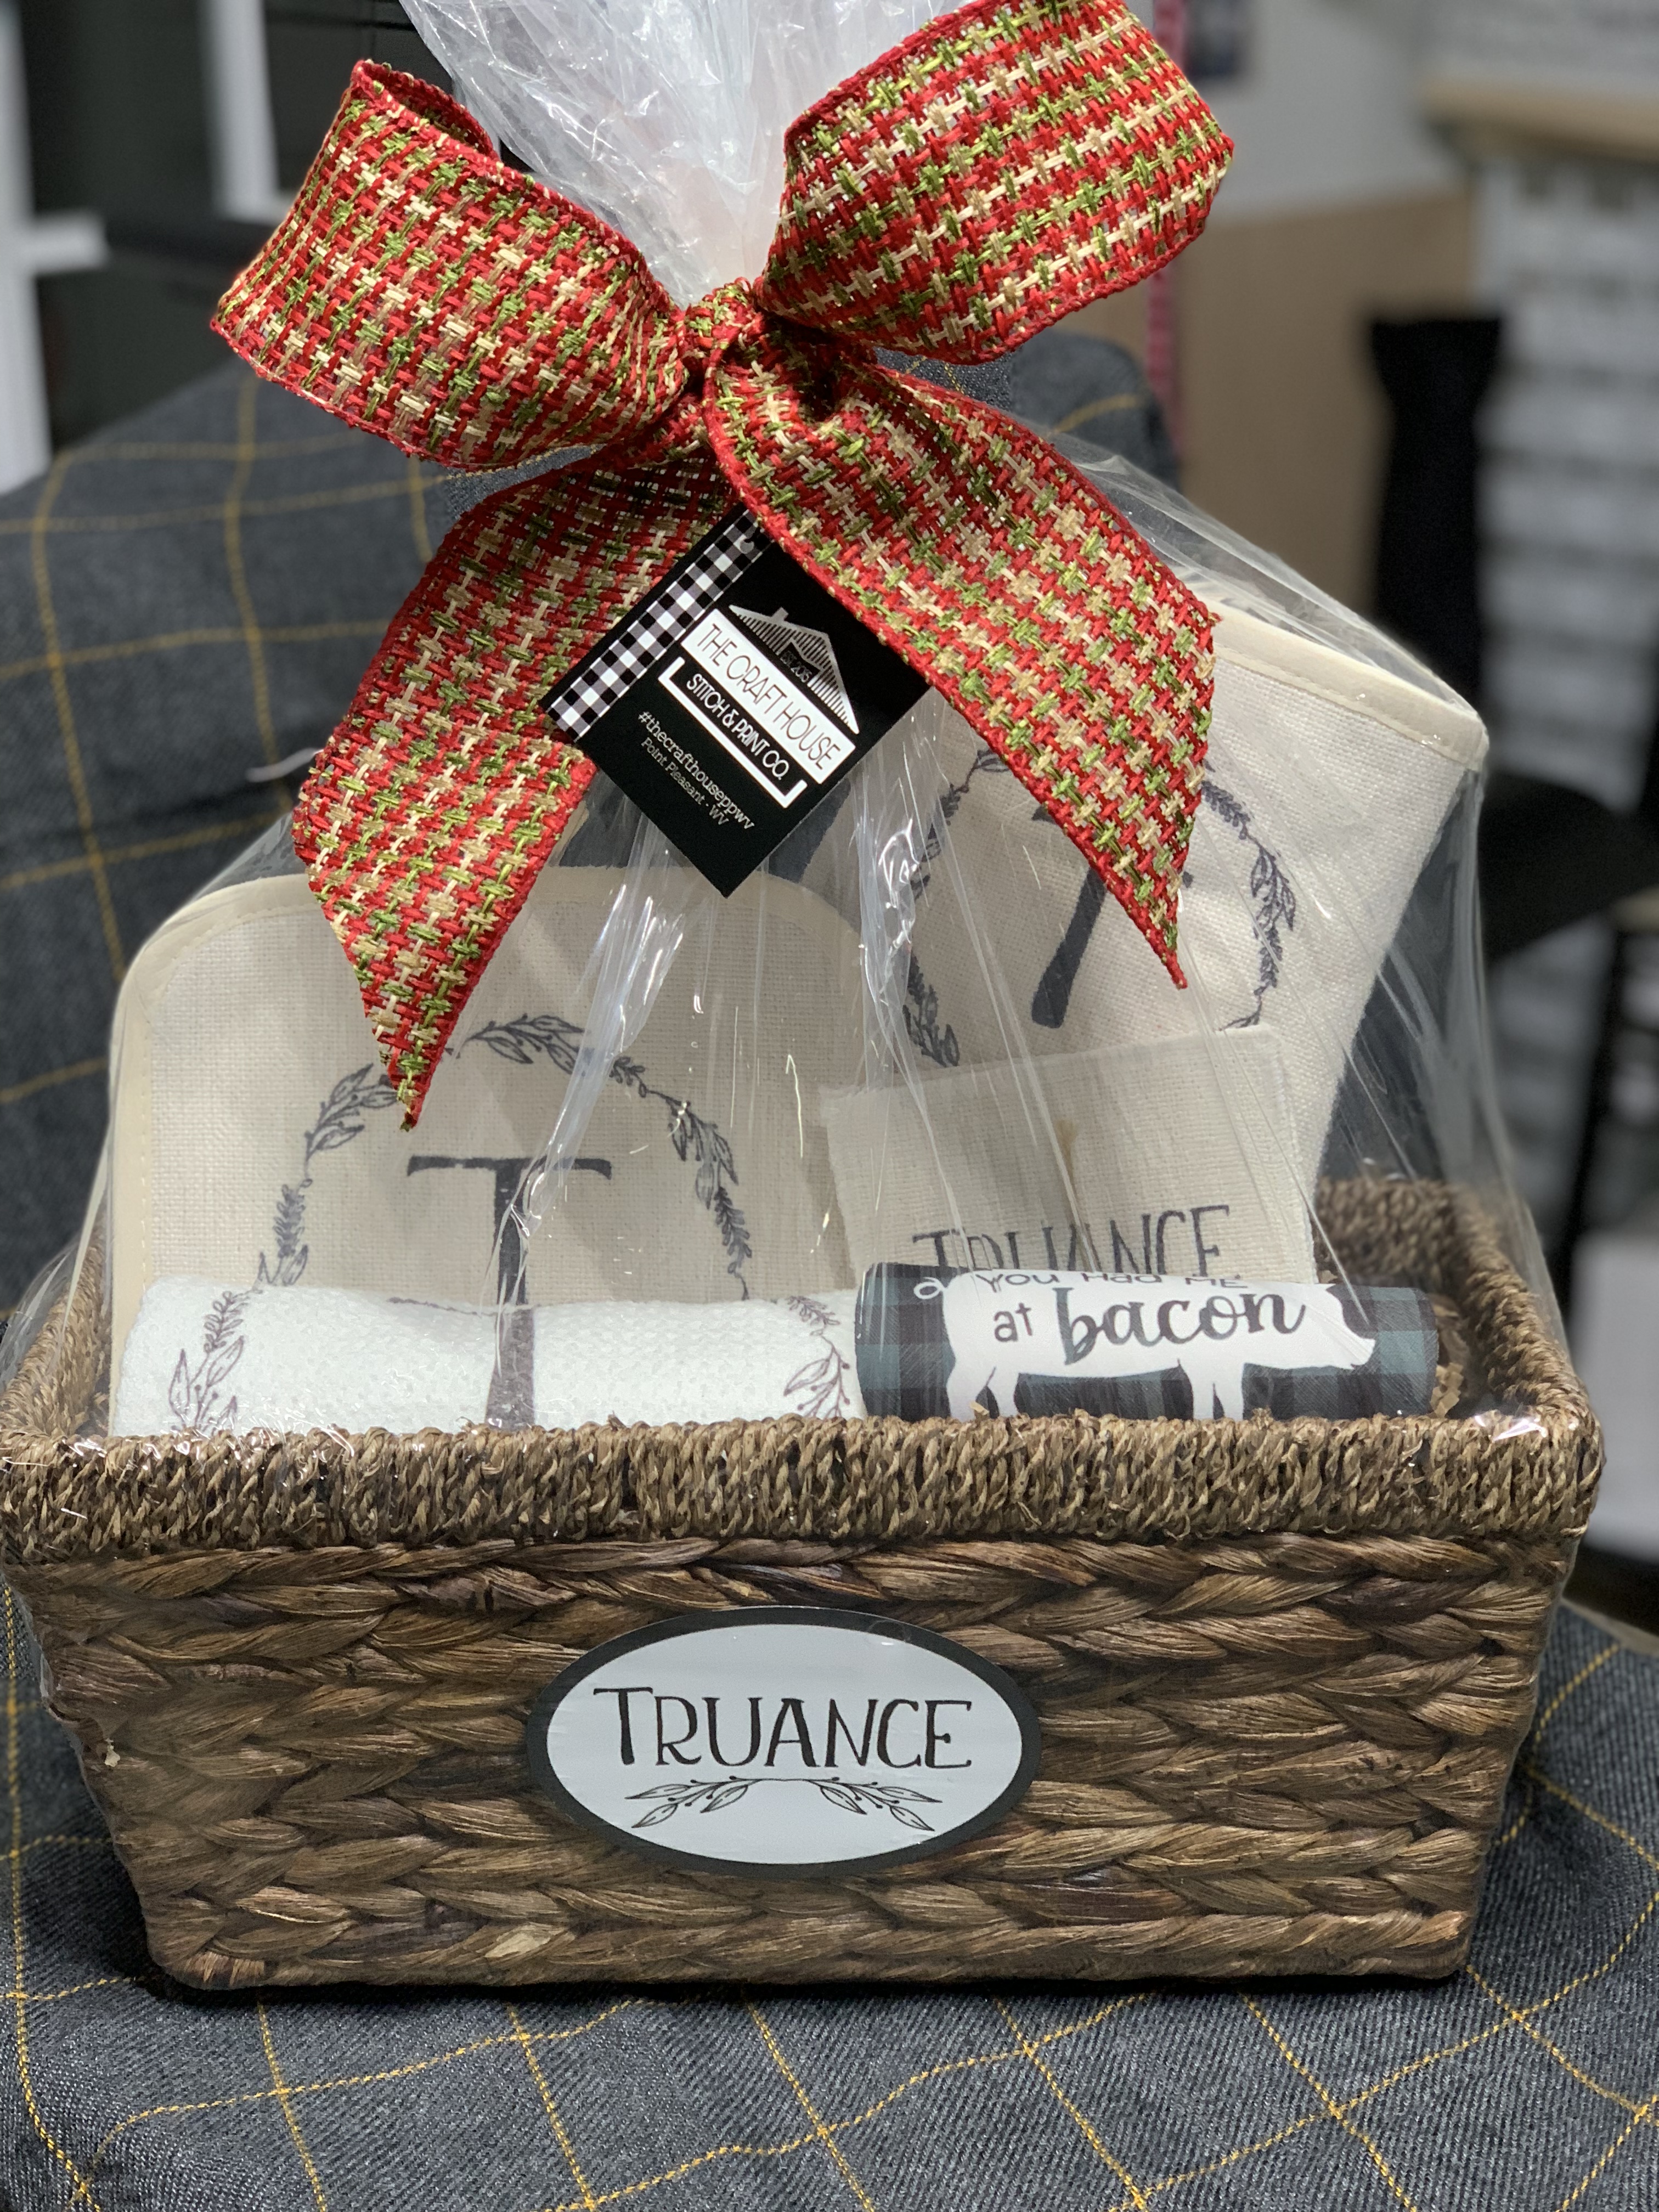 personalized gift basket - has linen mits and coasters, jar opener, and waffle towel - front ov